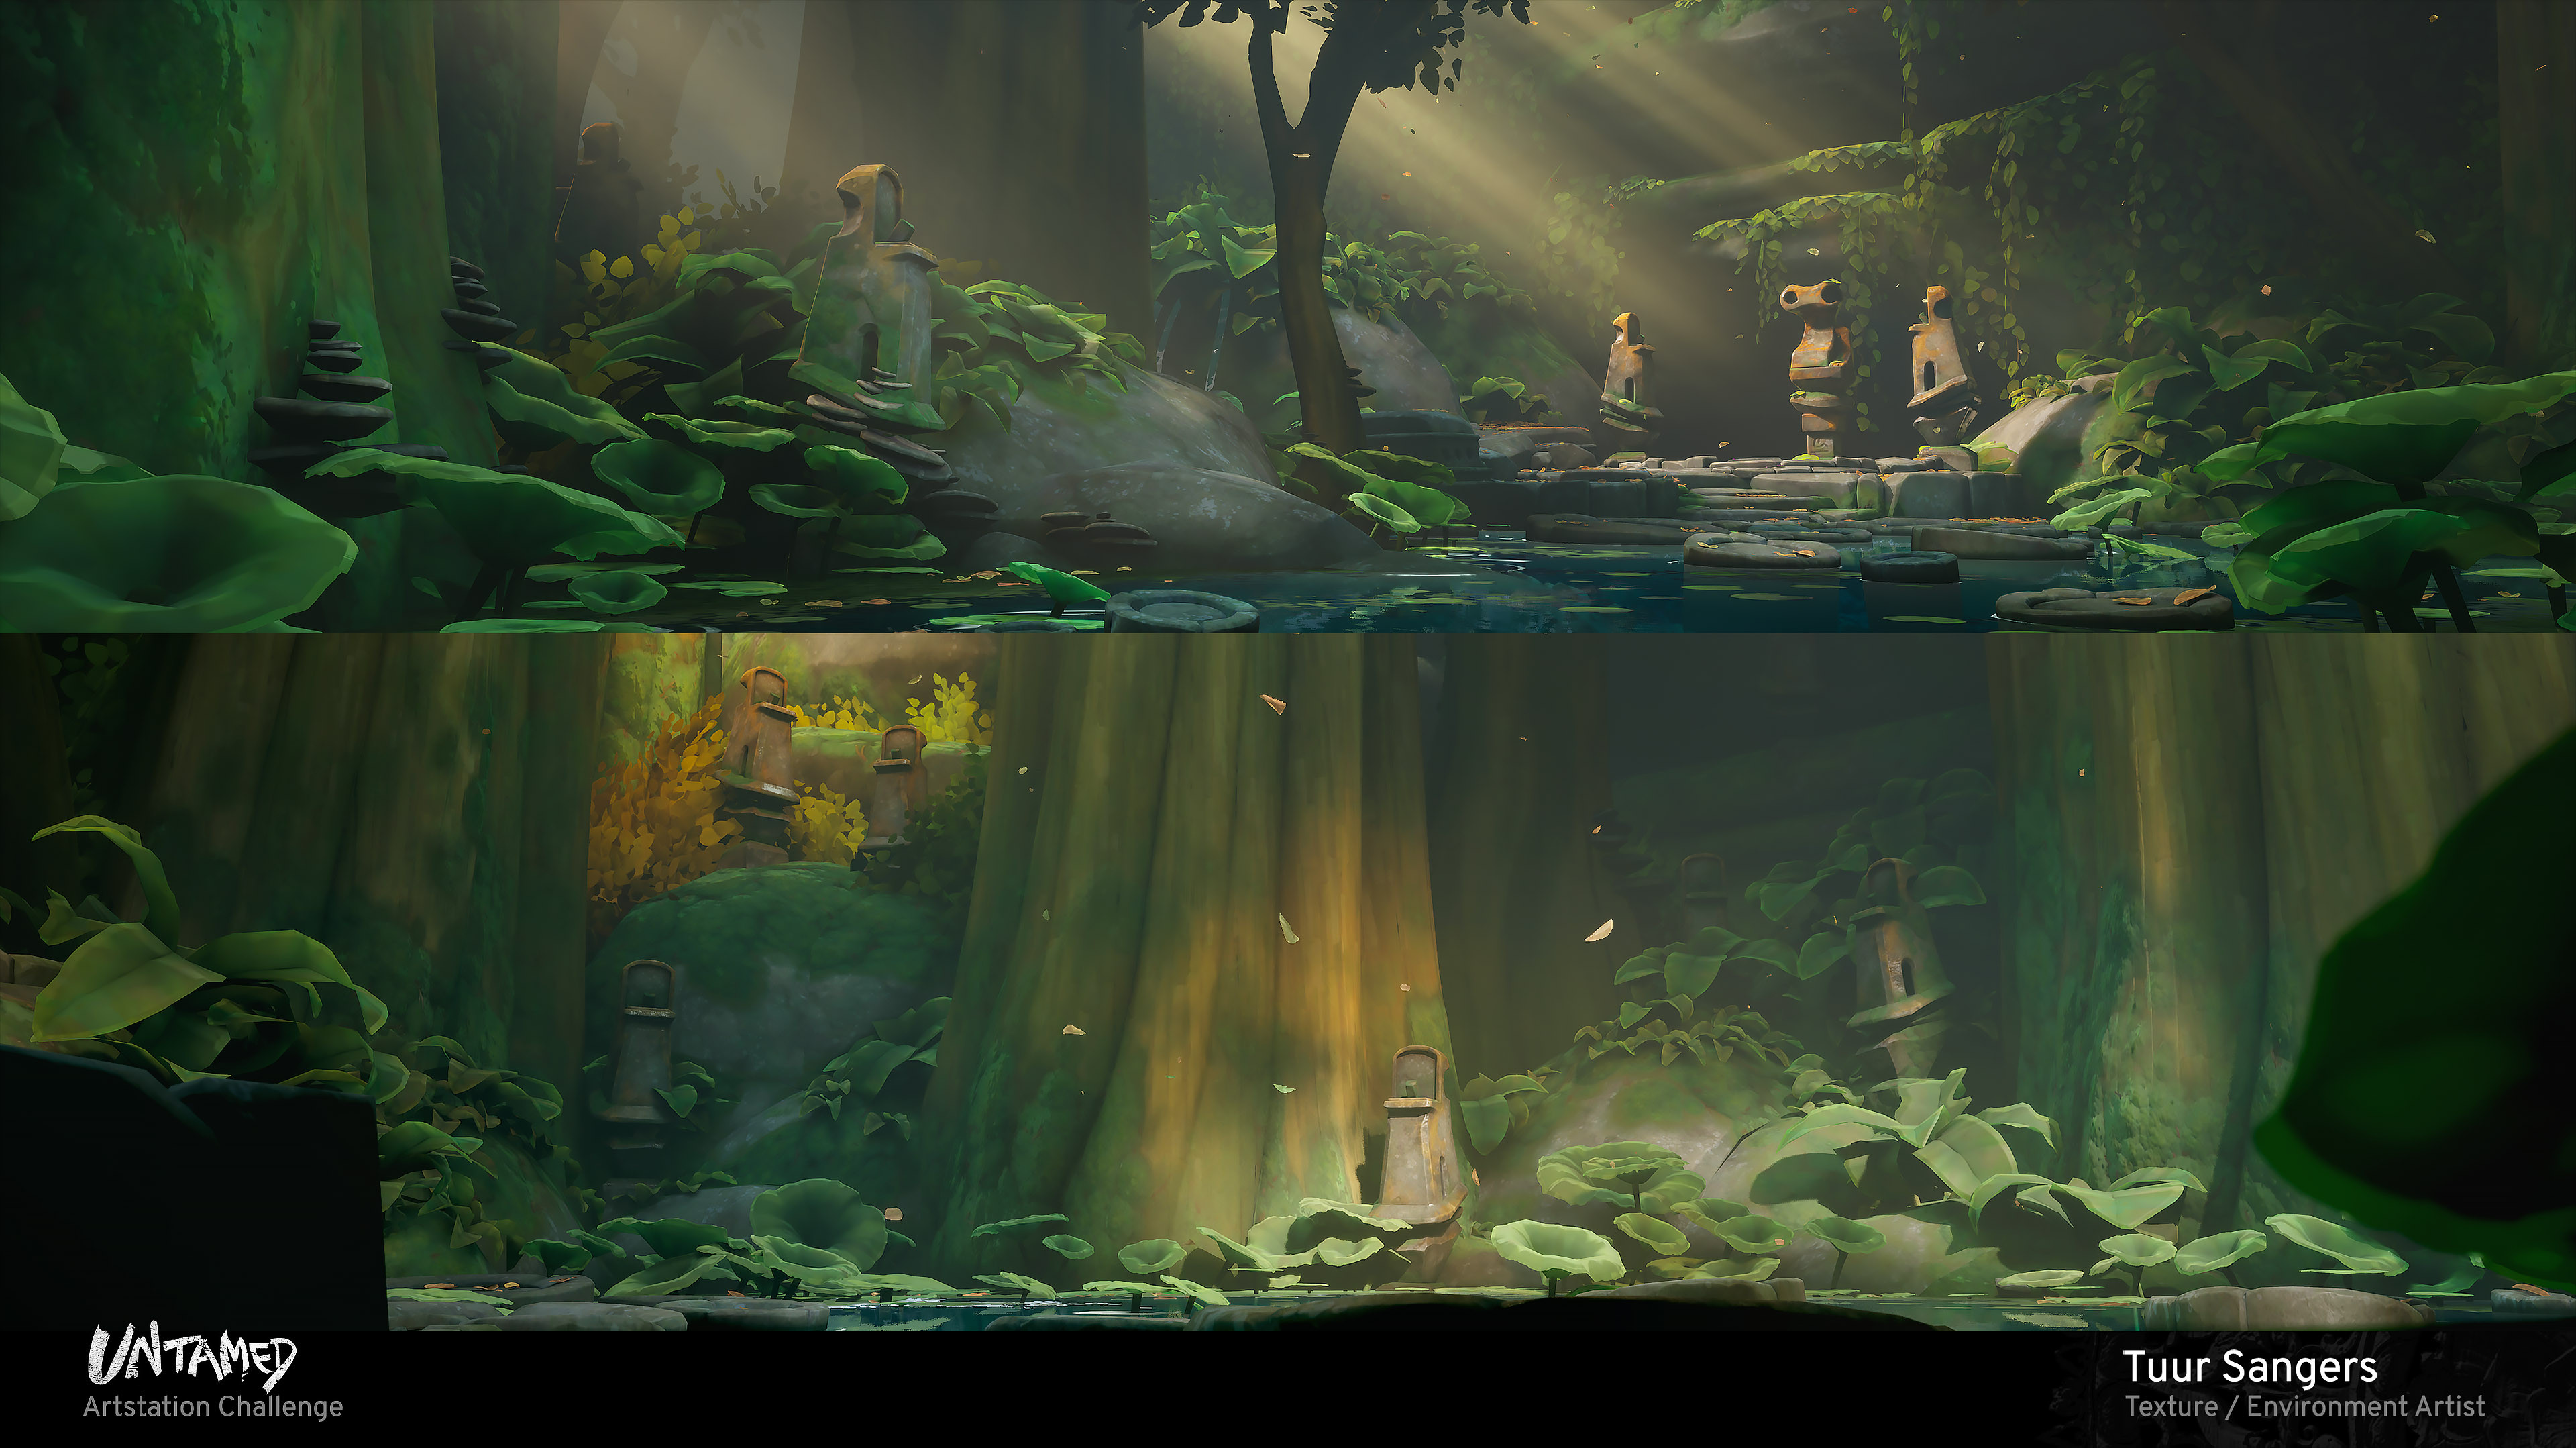   Some more shots to give a better sense of scale. I included an entrance area, that would allow some better pacing. I was really inspired by the classic Zelda Fairy Fountains that provide this peaceful environments